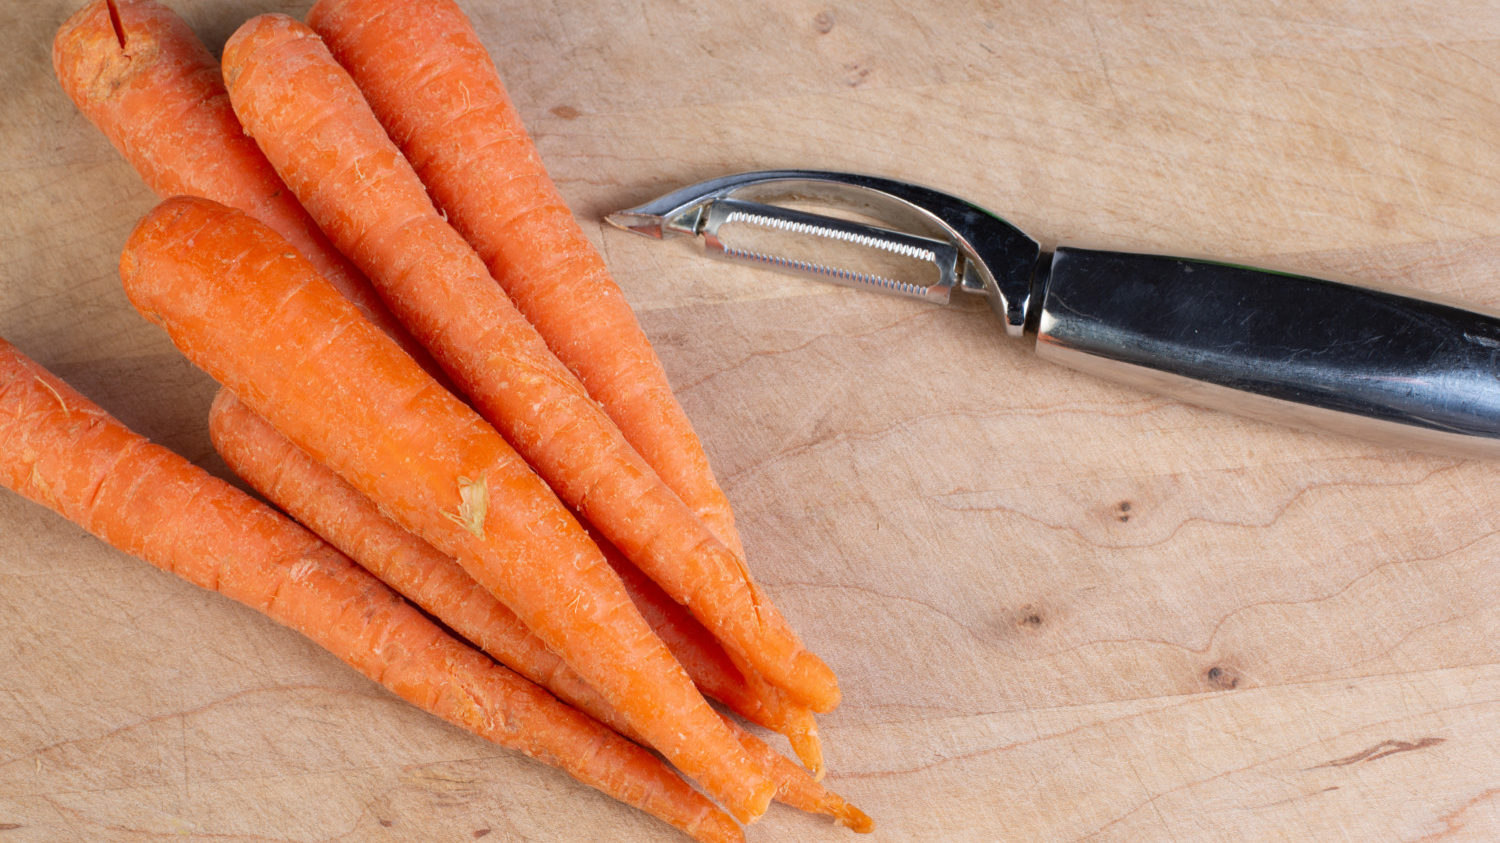 do you have to peel carrots